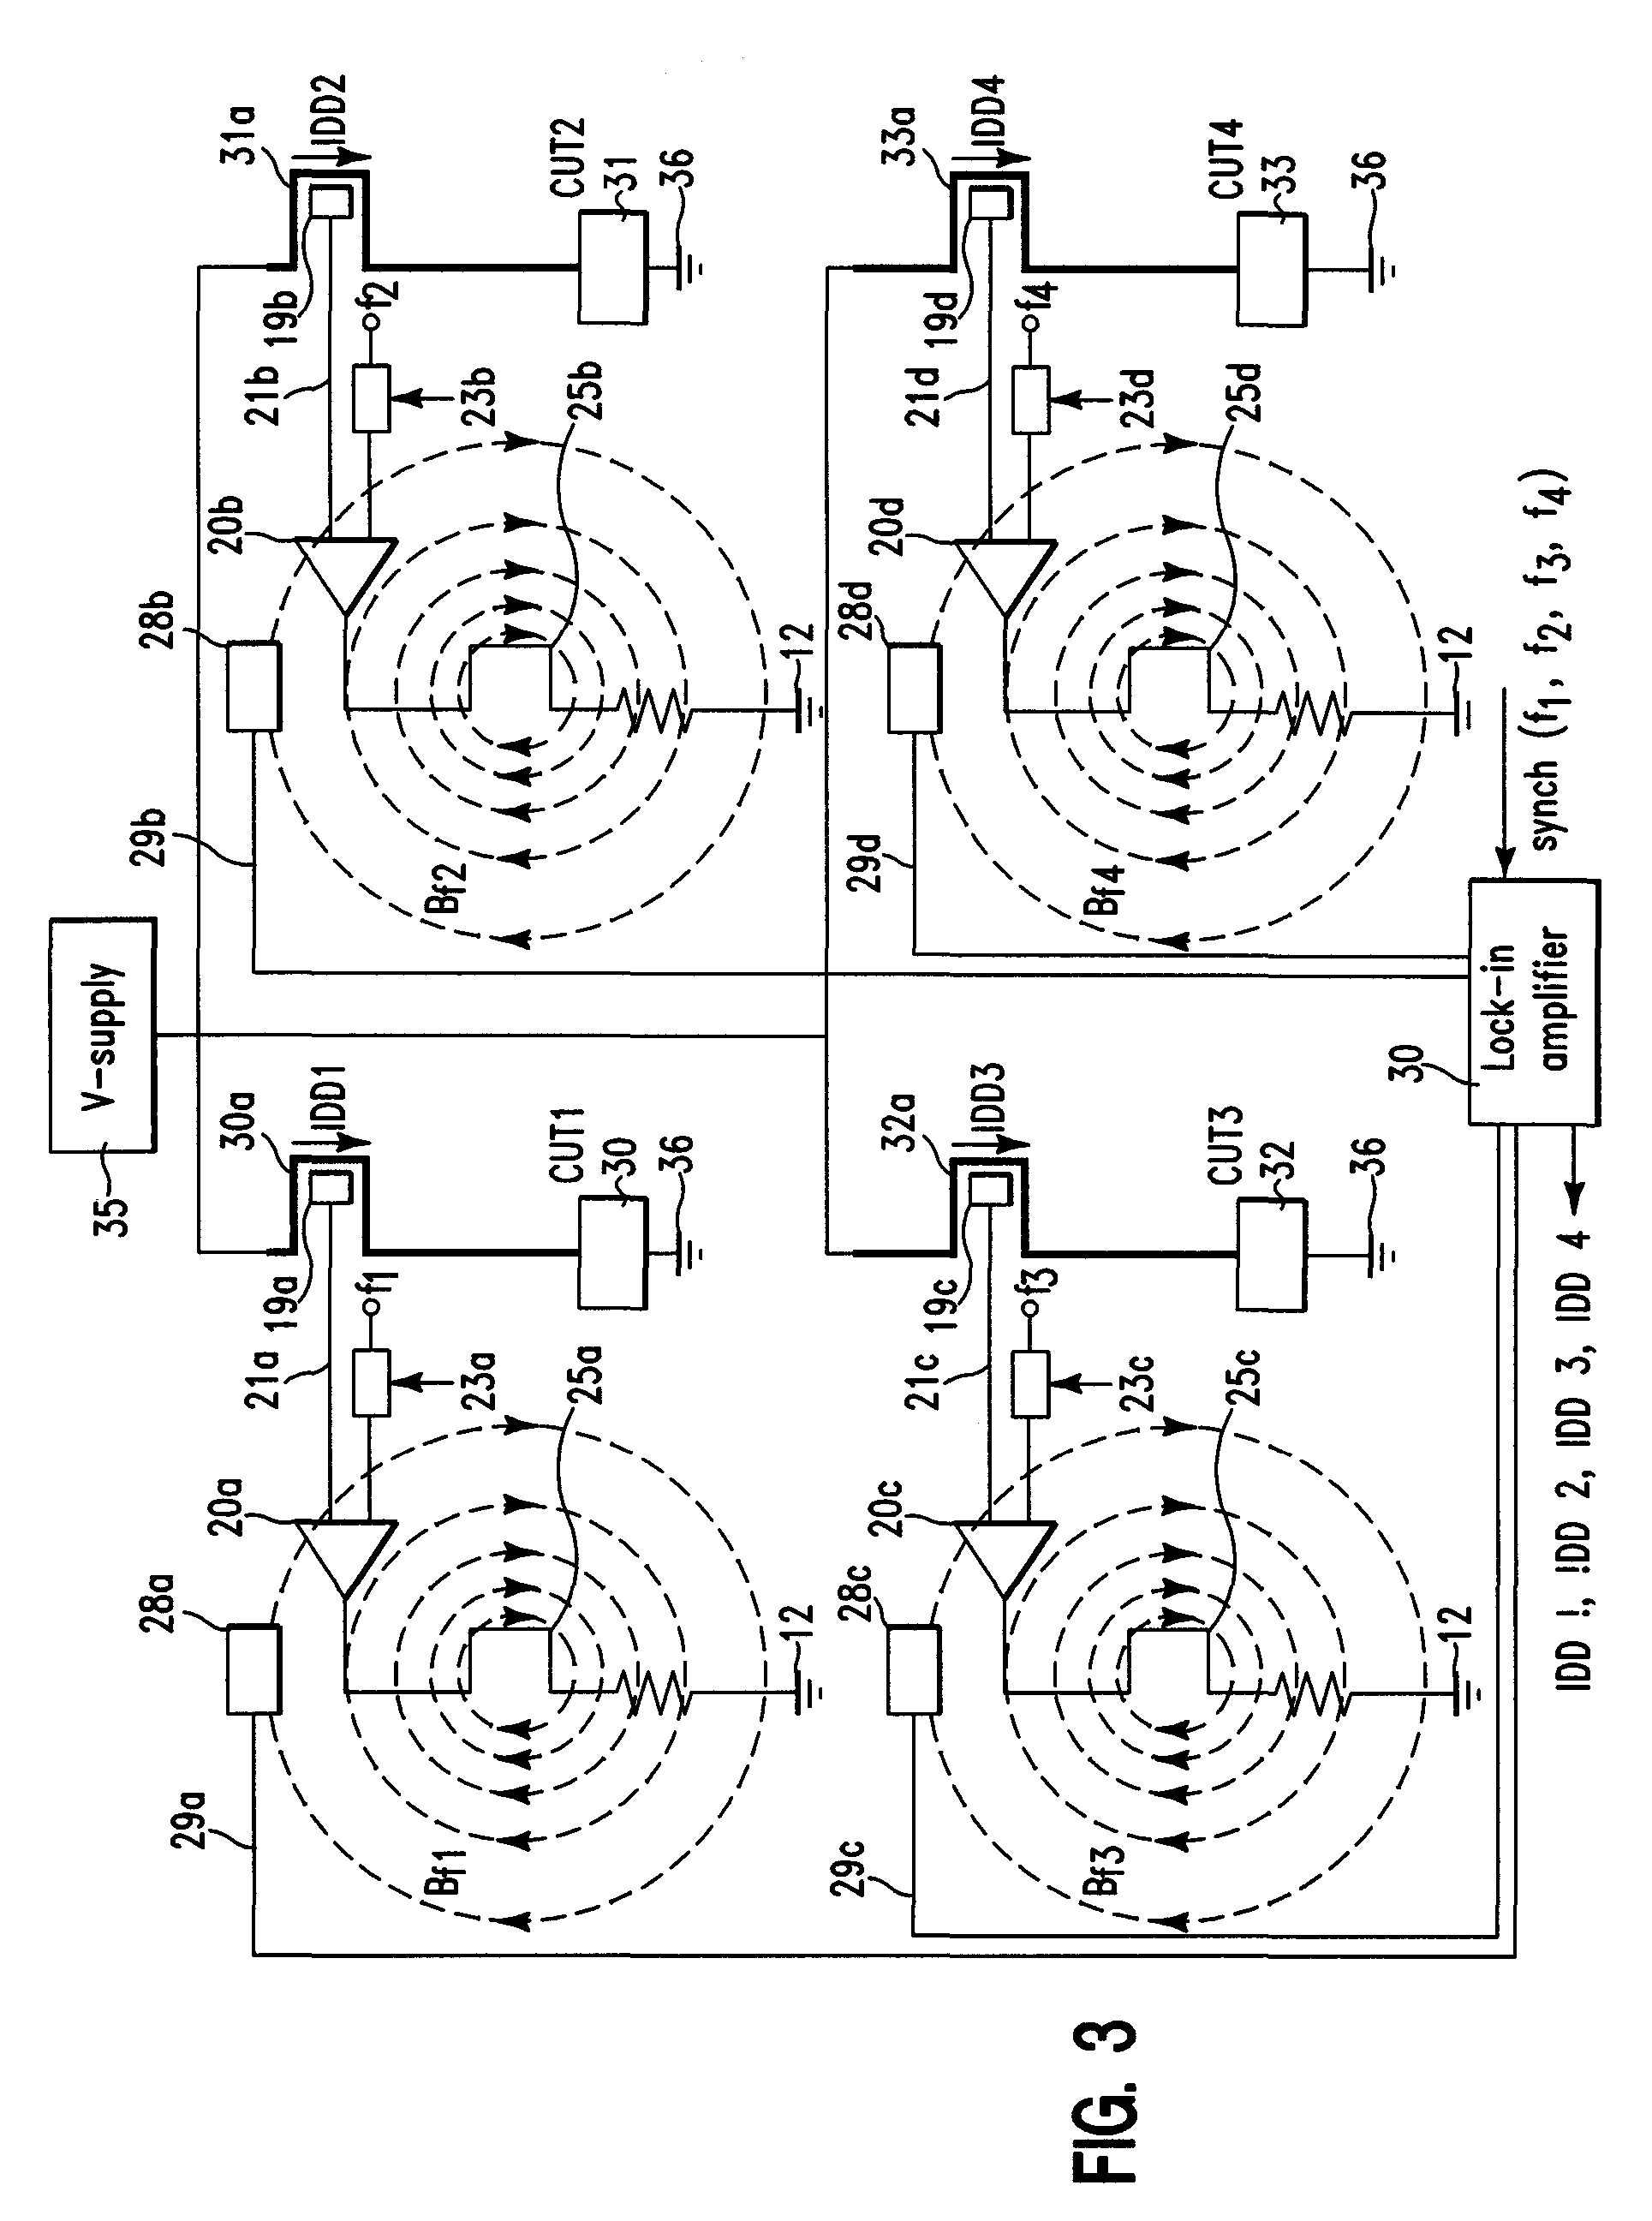 Apparatus and method for transmission and remote sensing of signals from integrated circuit devices